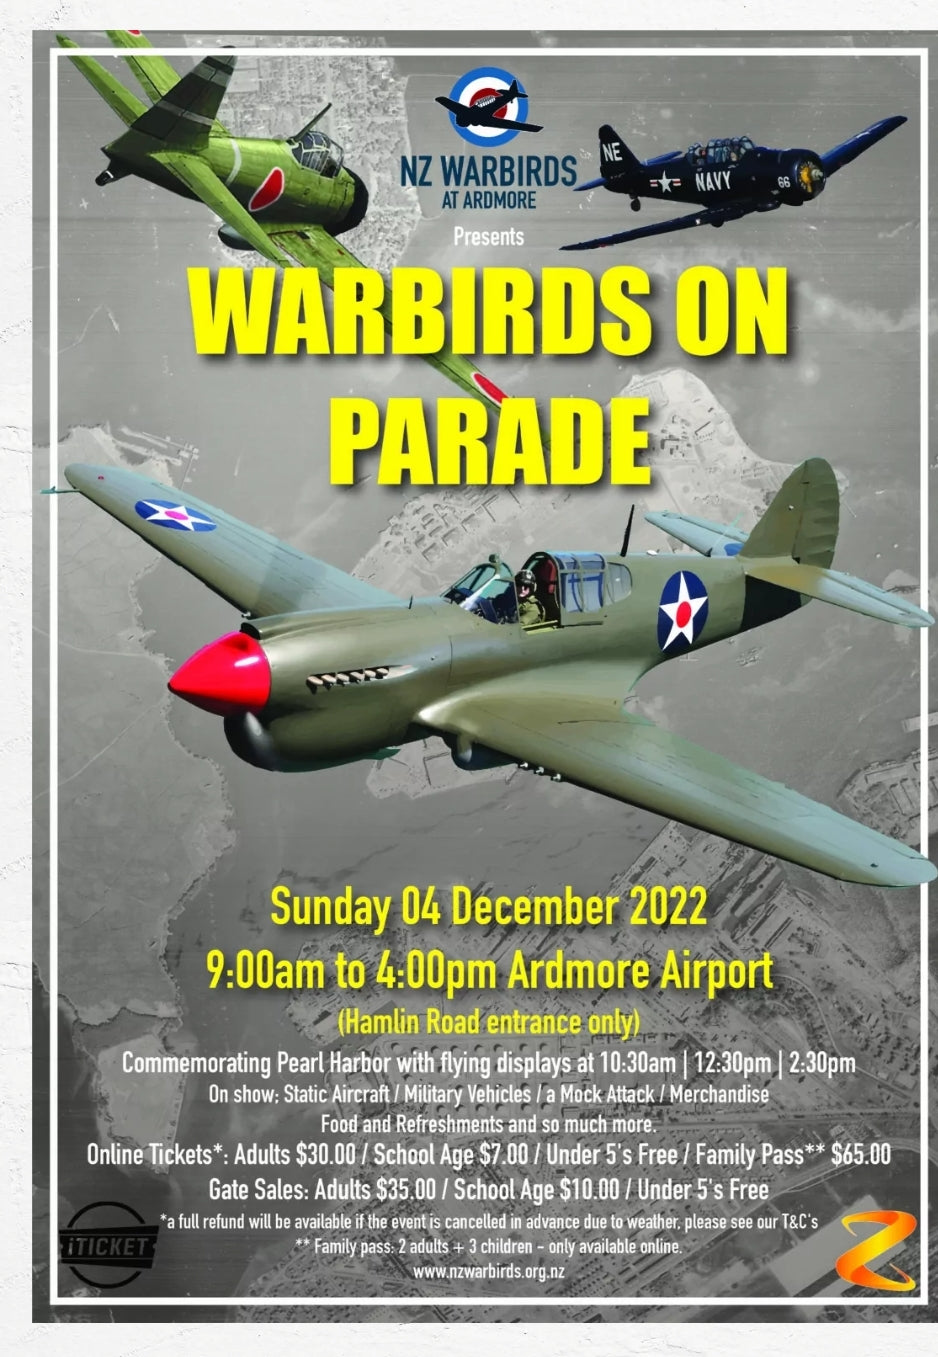 We are going to be at Warbirds on Parade at Ardmore December 4th 2022